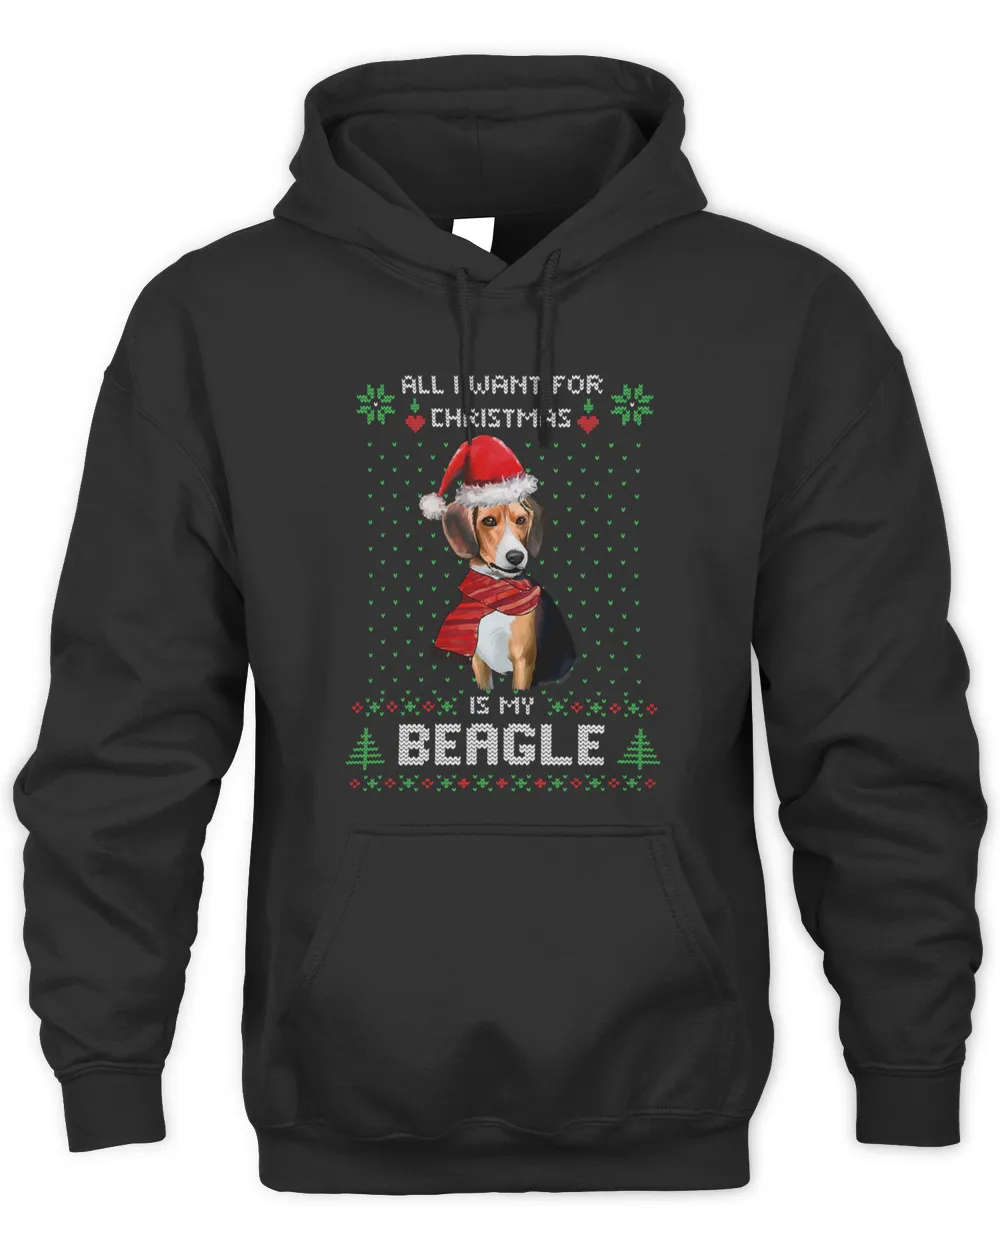 Beagle Ugly Sweater ALL I WANT FOR CHRISTMAS IS MY BEAGLE Pajama 224 Dog Lover